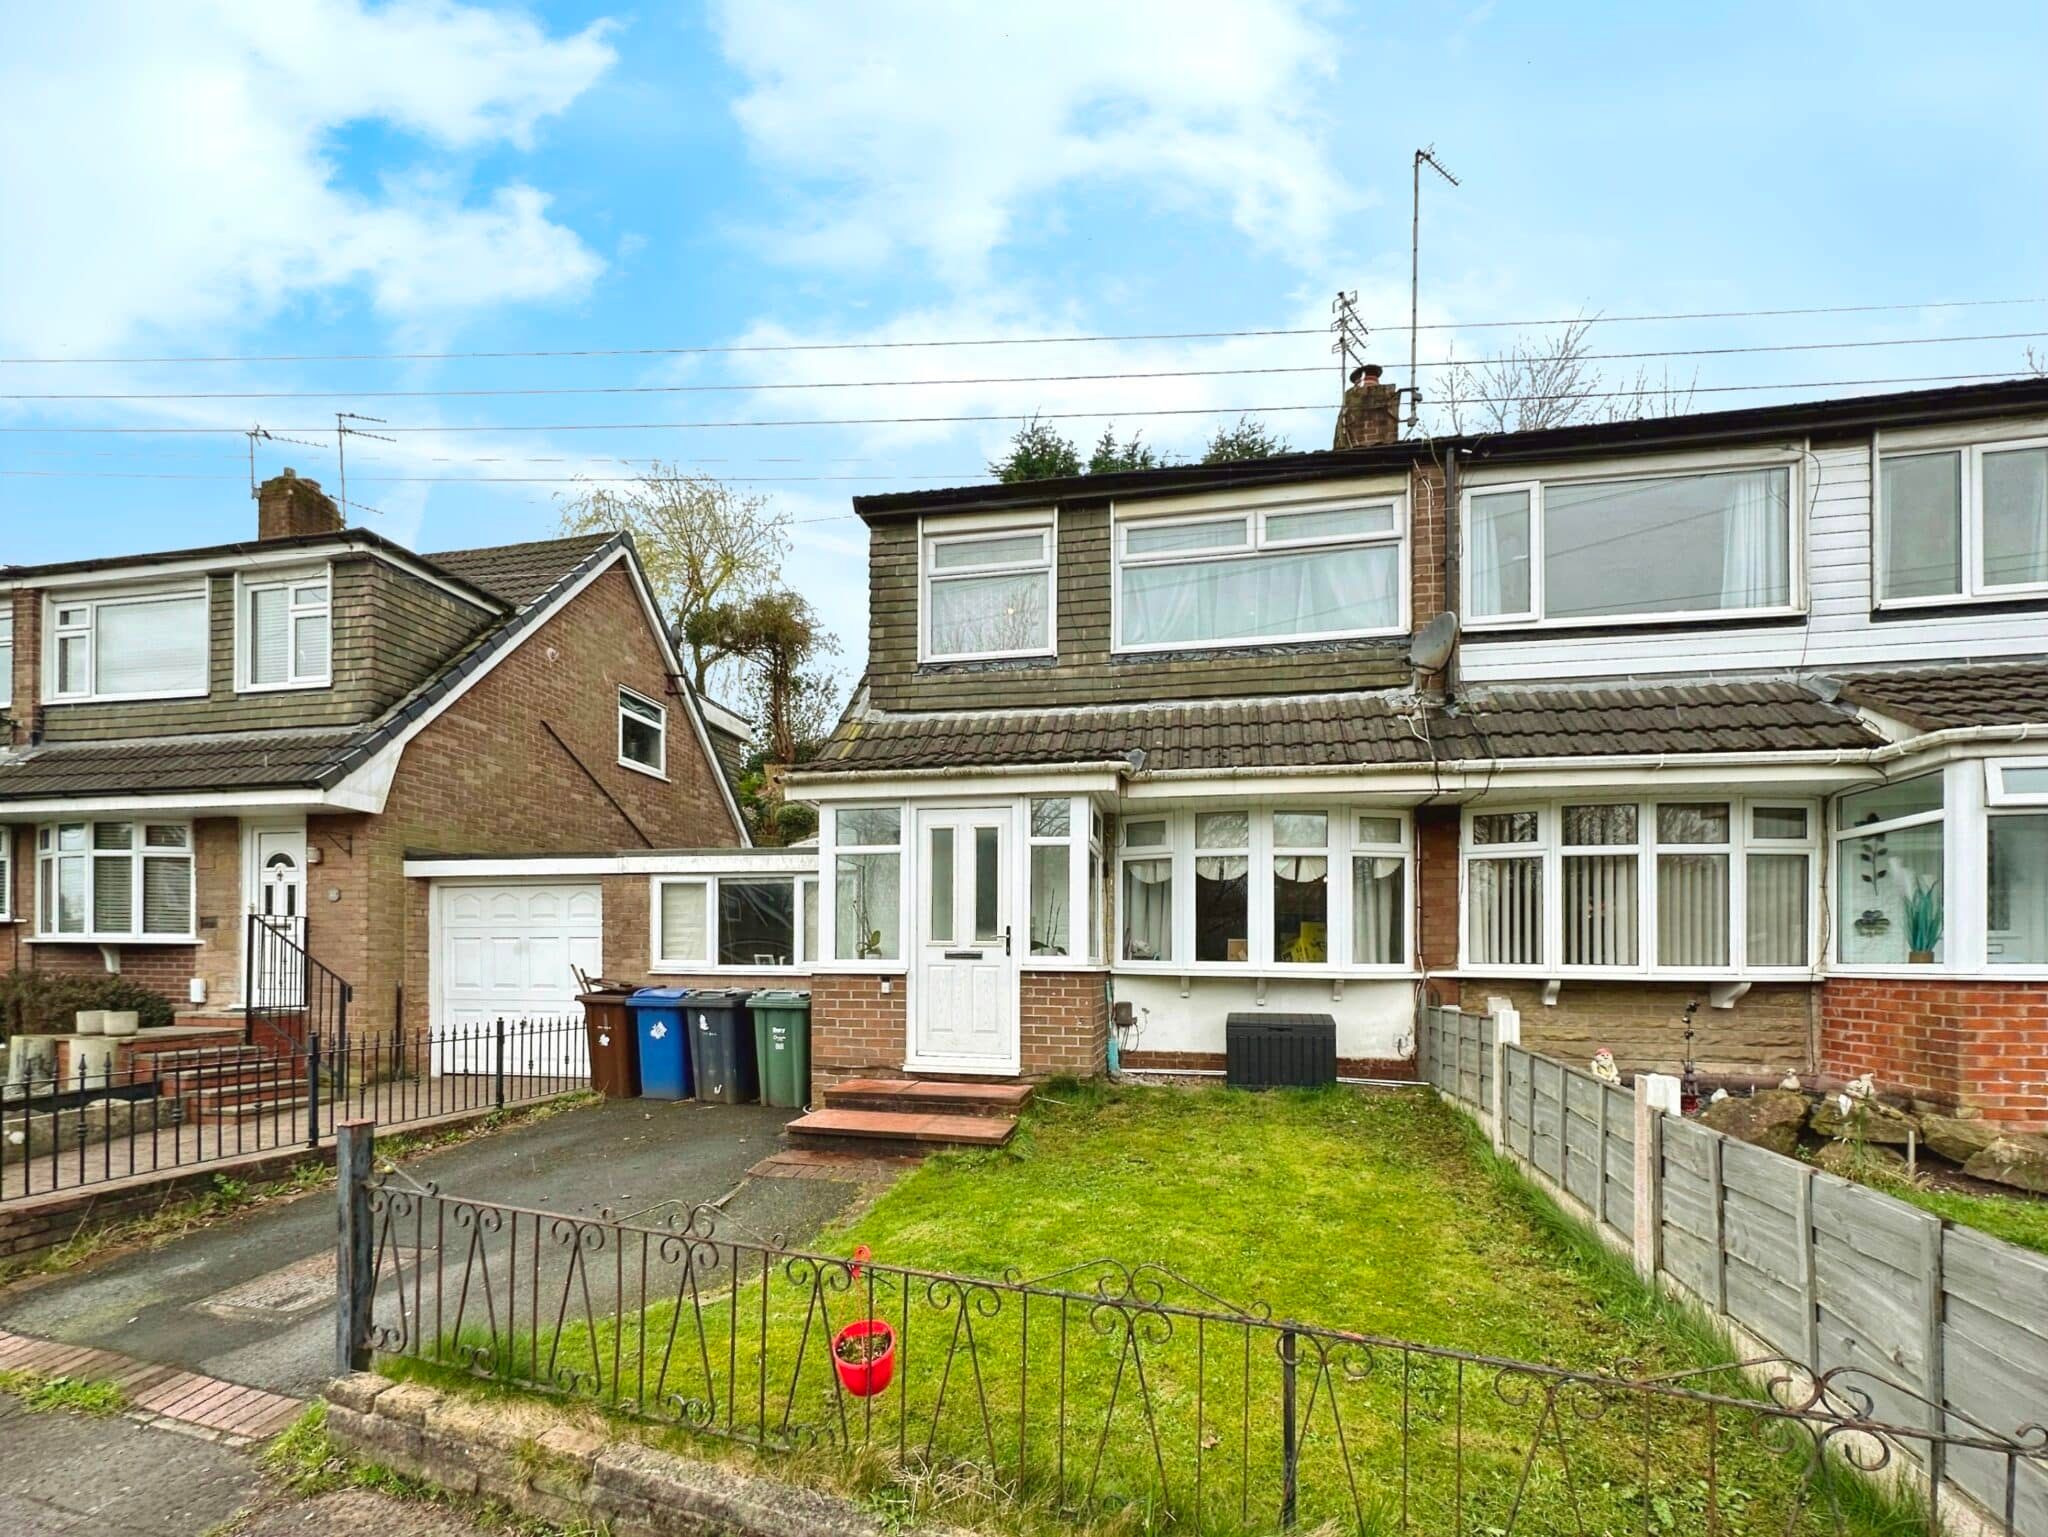 Nuttall Avenue, Whitefield, Manchester, Manchester, M45 6QA